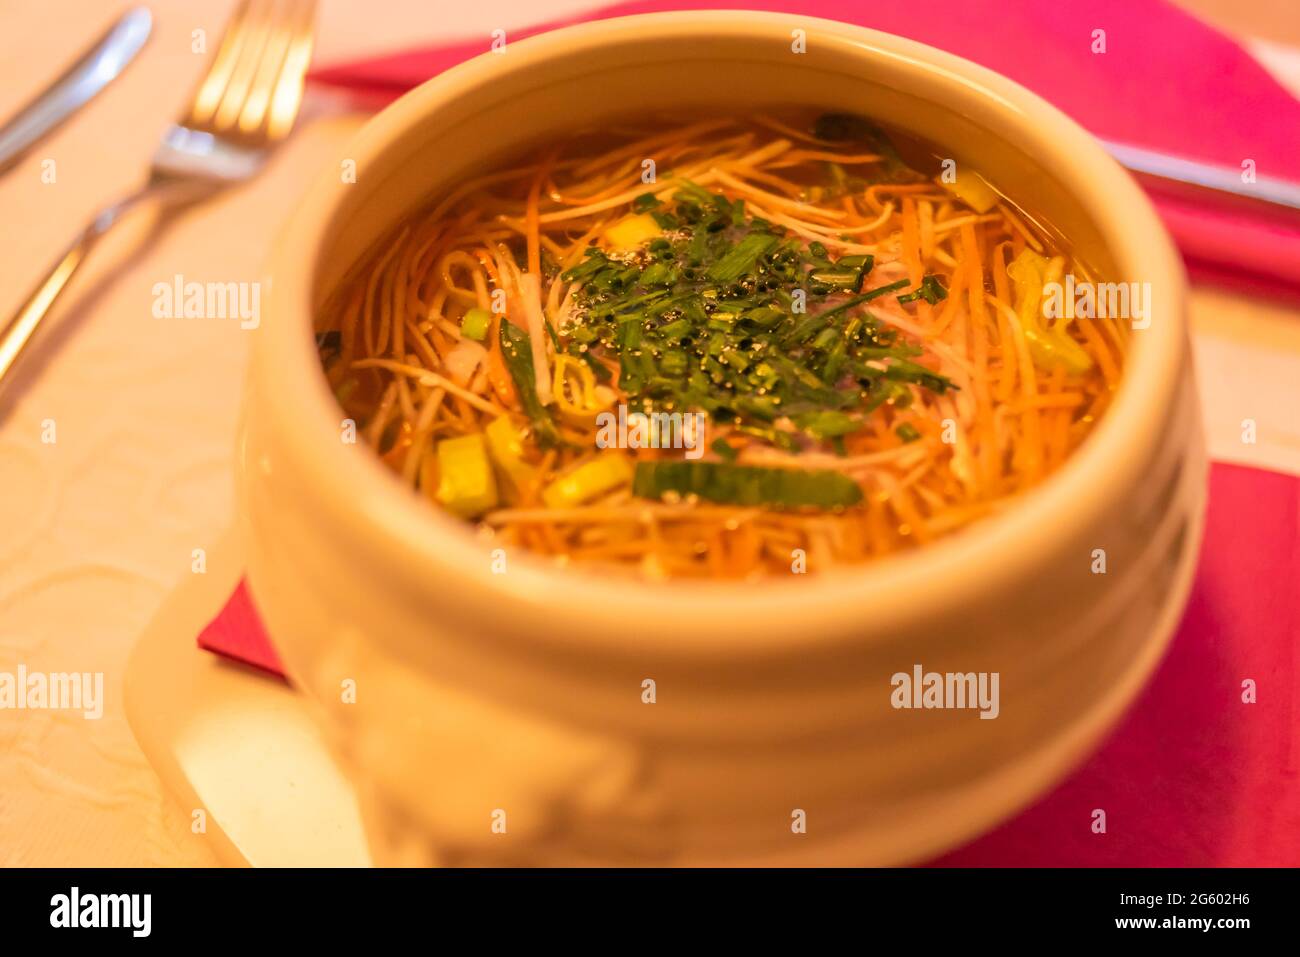 Noodle soup with green onion in a ceramic bowl, on red napkin. Stock Photo